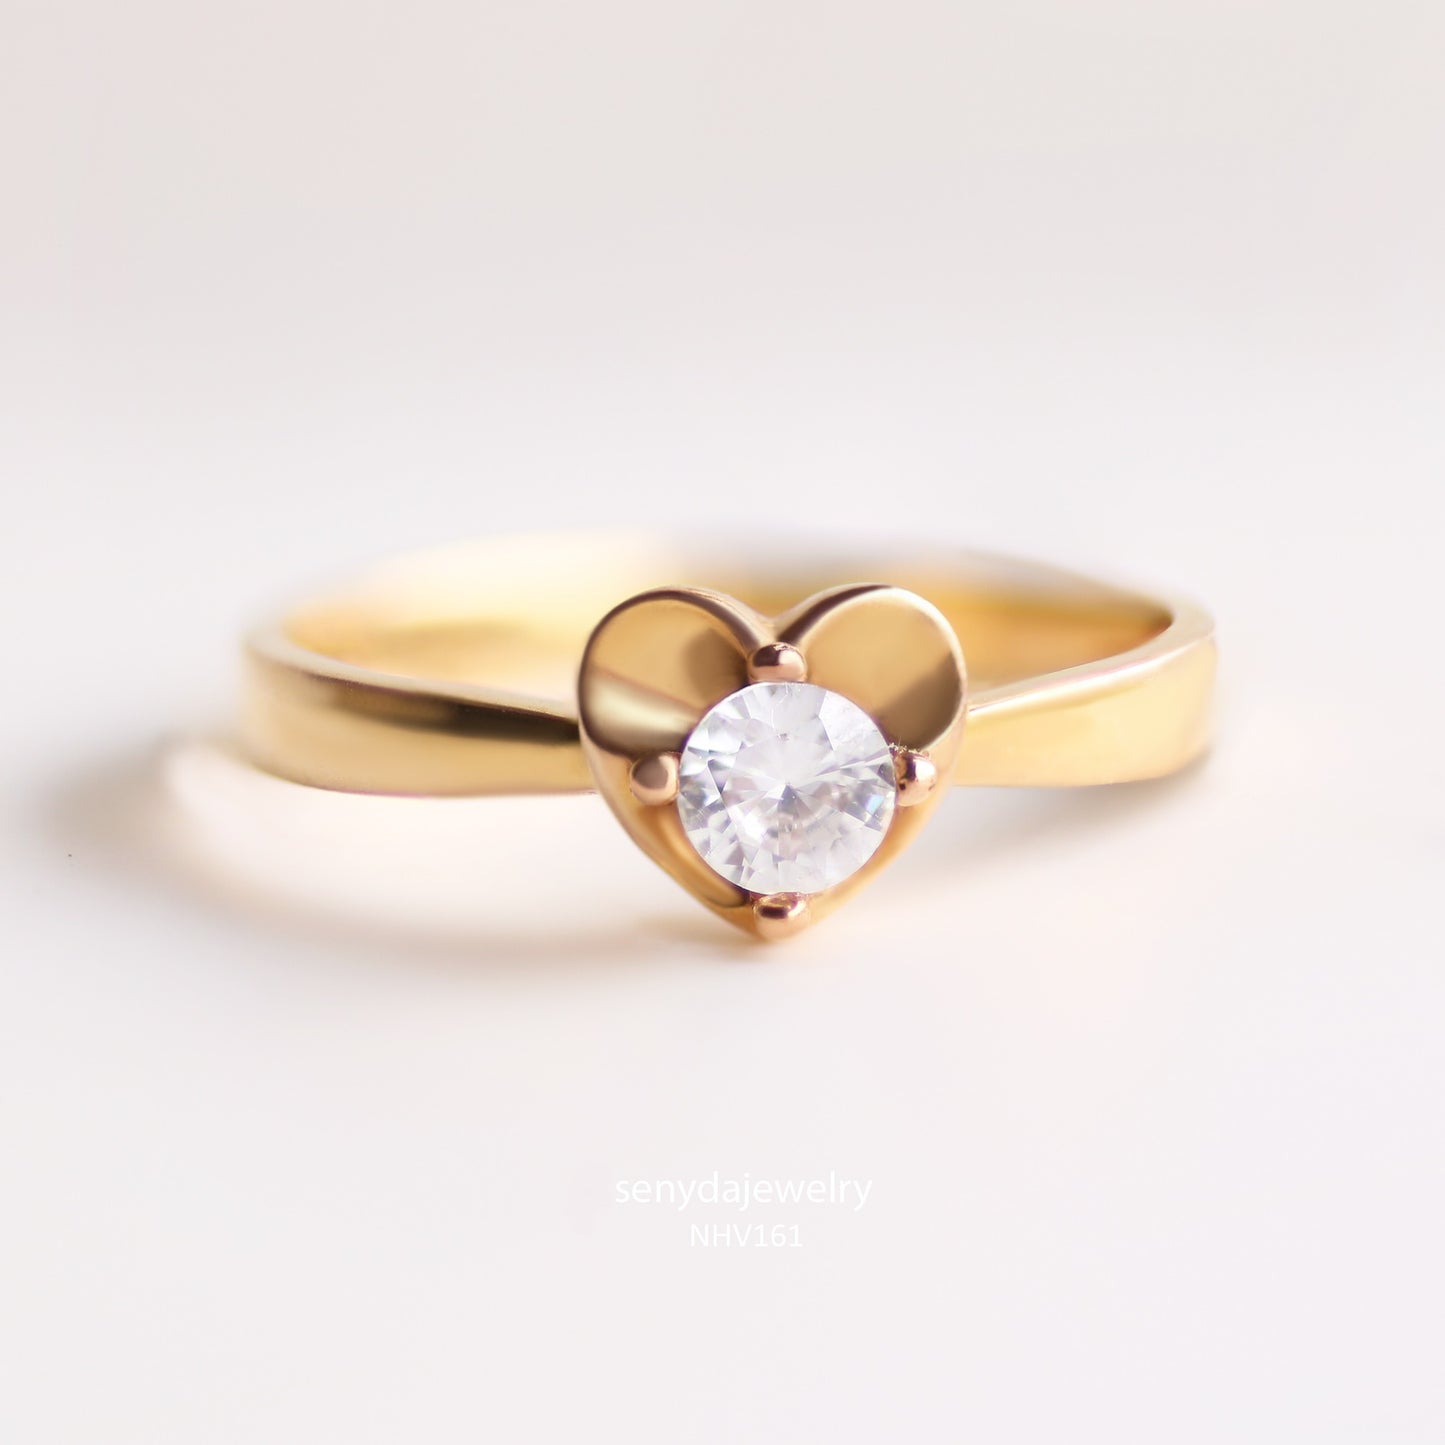 Senyda 14K Solid Gold Special Ring - HELIA RING